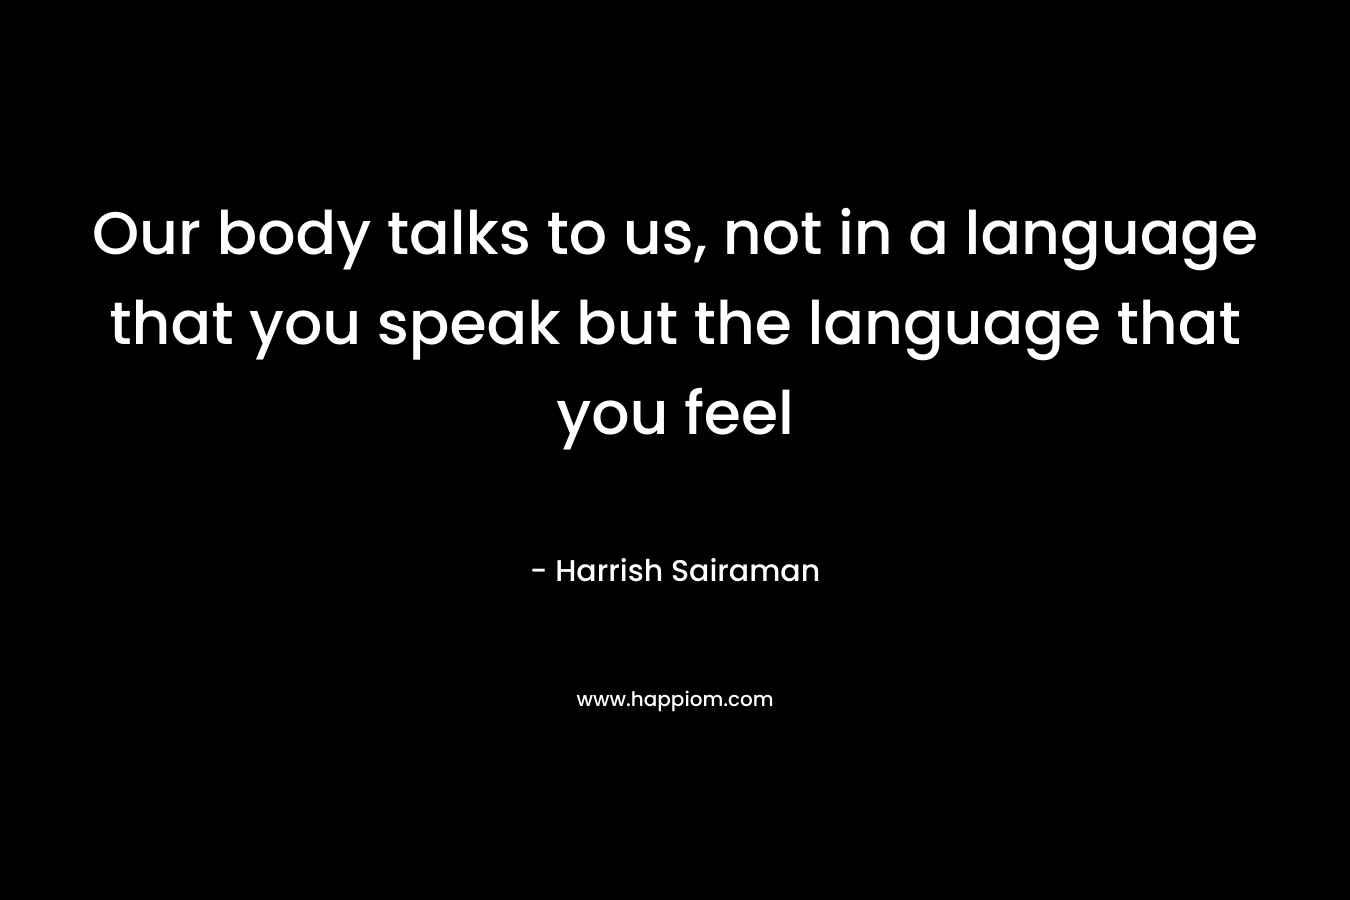 Our body talks to us, not in a language that you speak but the language that you feel